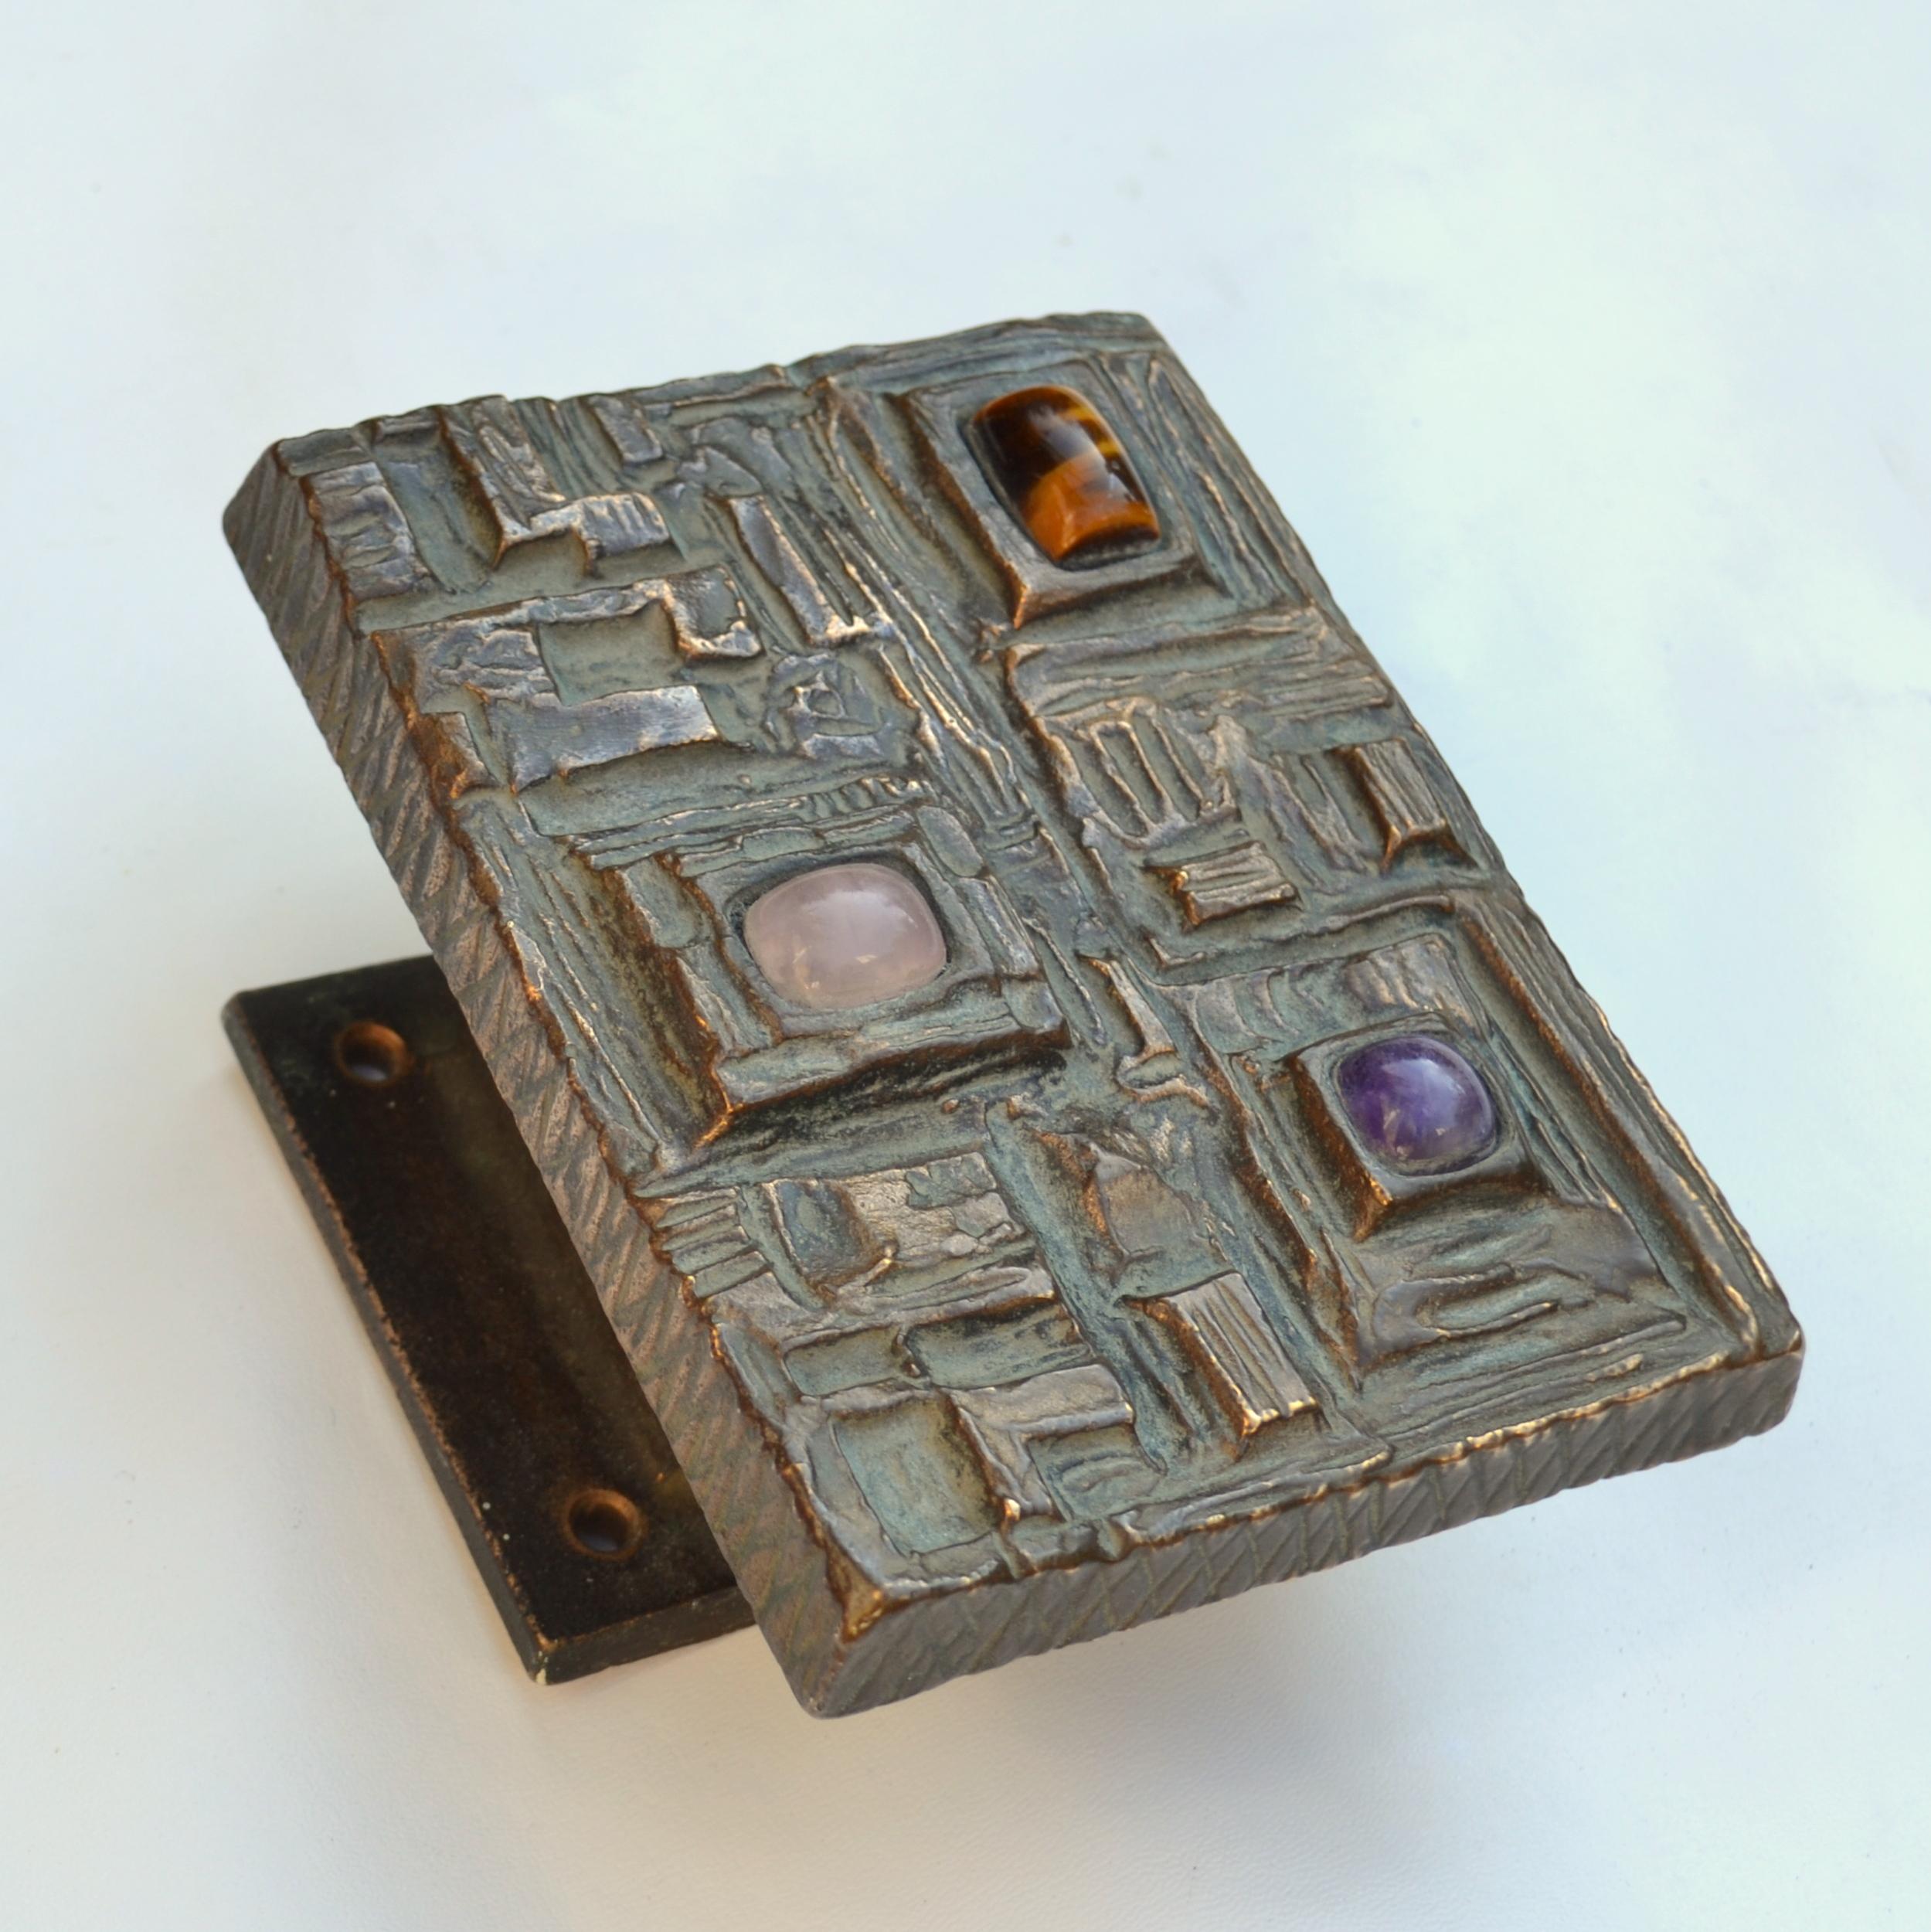 Abstract bronze door handle with three semi-precious stones (tigers eye, amethyst, rose quartz) that stand out against Brutalist relief with original patina. This 1970s rich in detail door handle for a push and pull door gives real personality to a